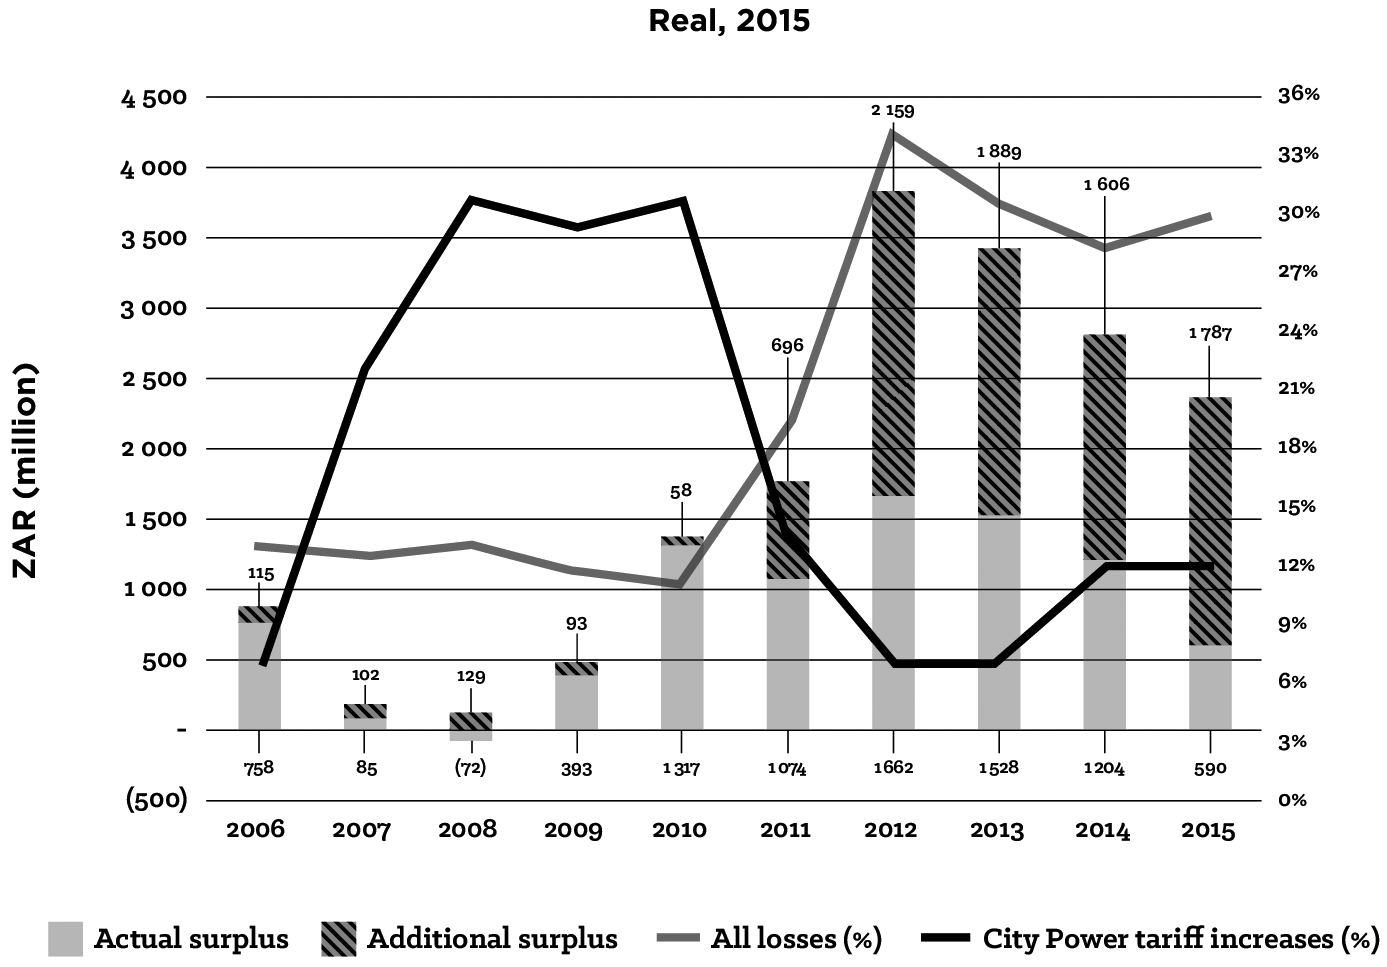 Figure 5.18: Revised Electricity Surplus for Johannesburg if Losses are Capped at 10% (2006 to 2015)